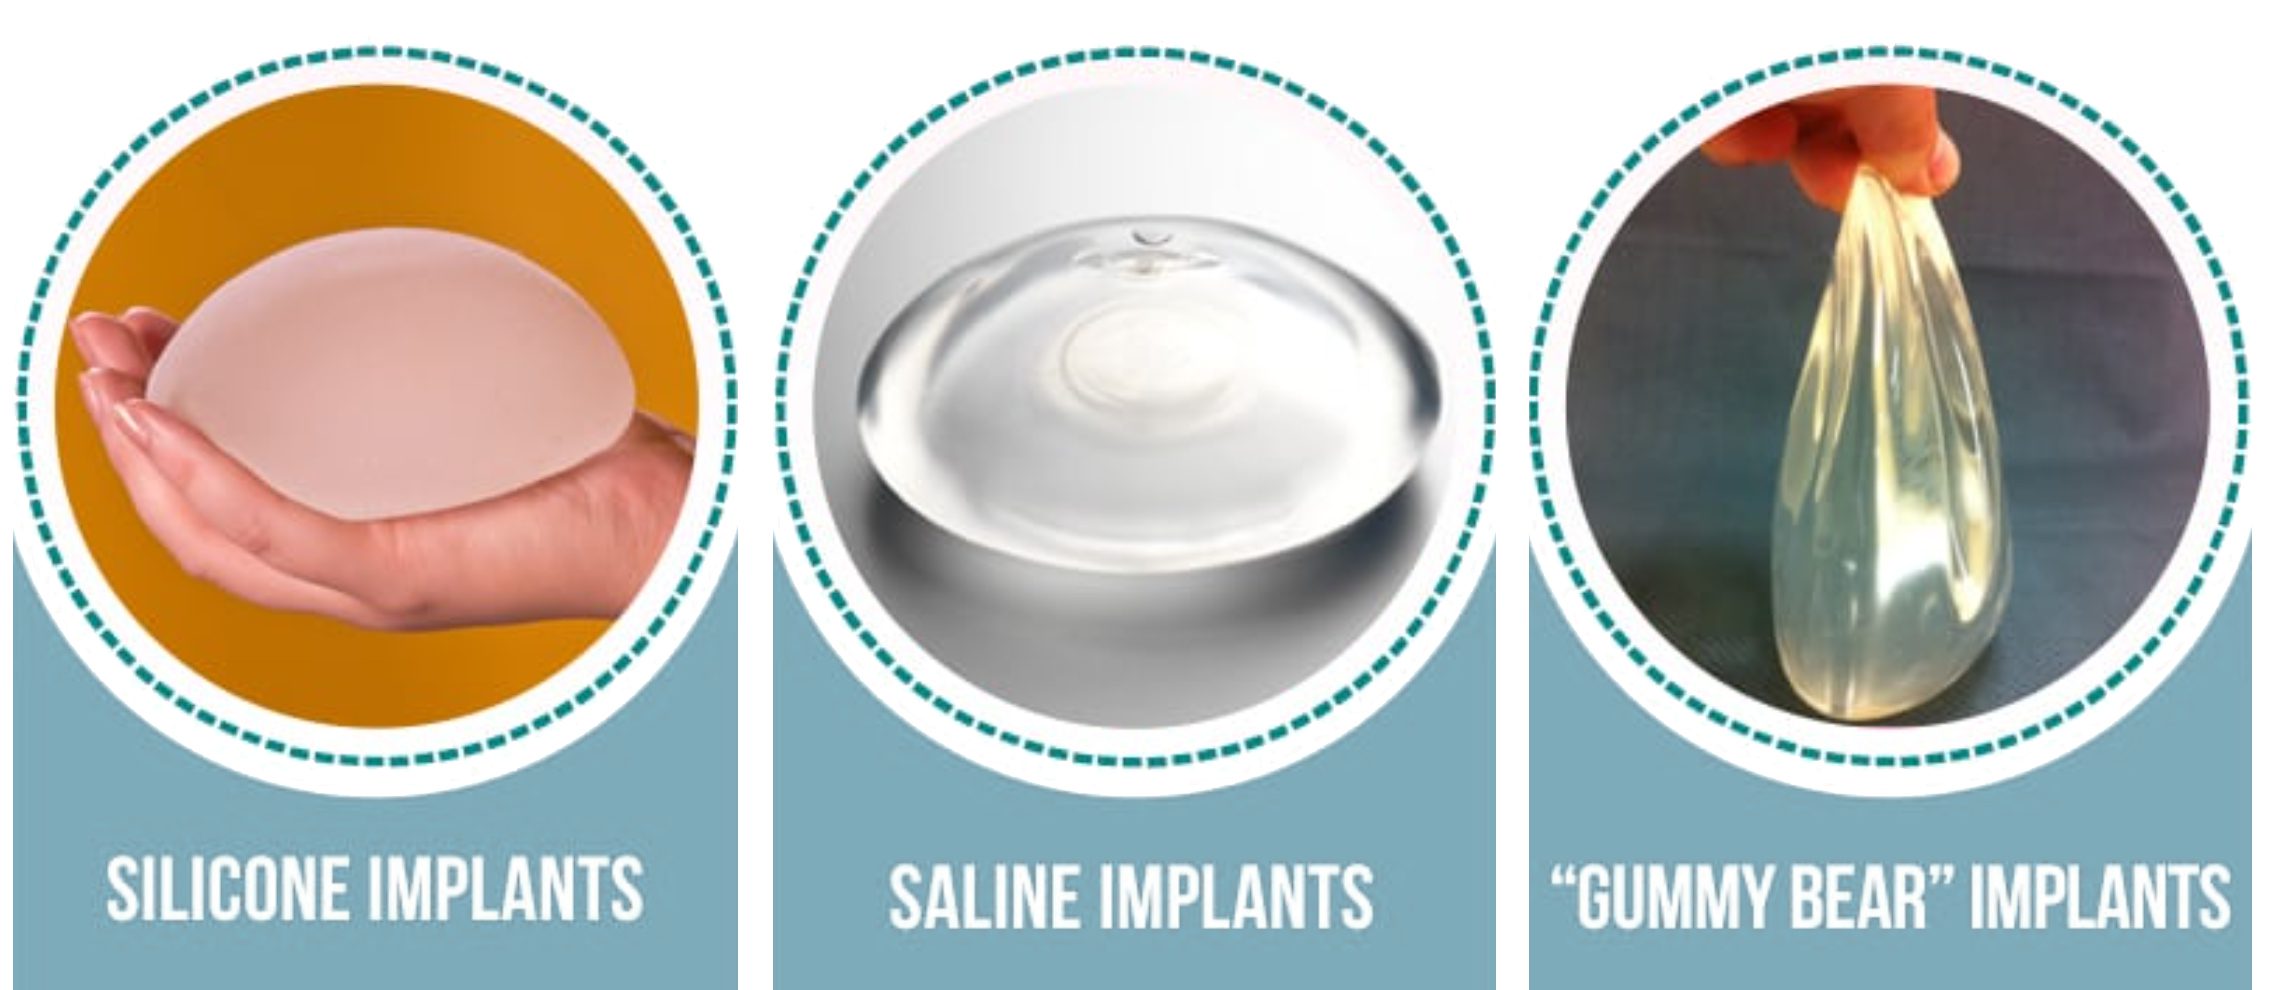 Silicone and Its Use in Breast Implants